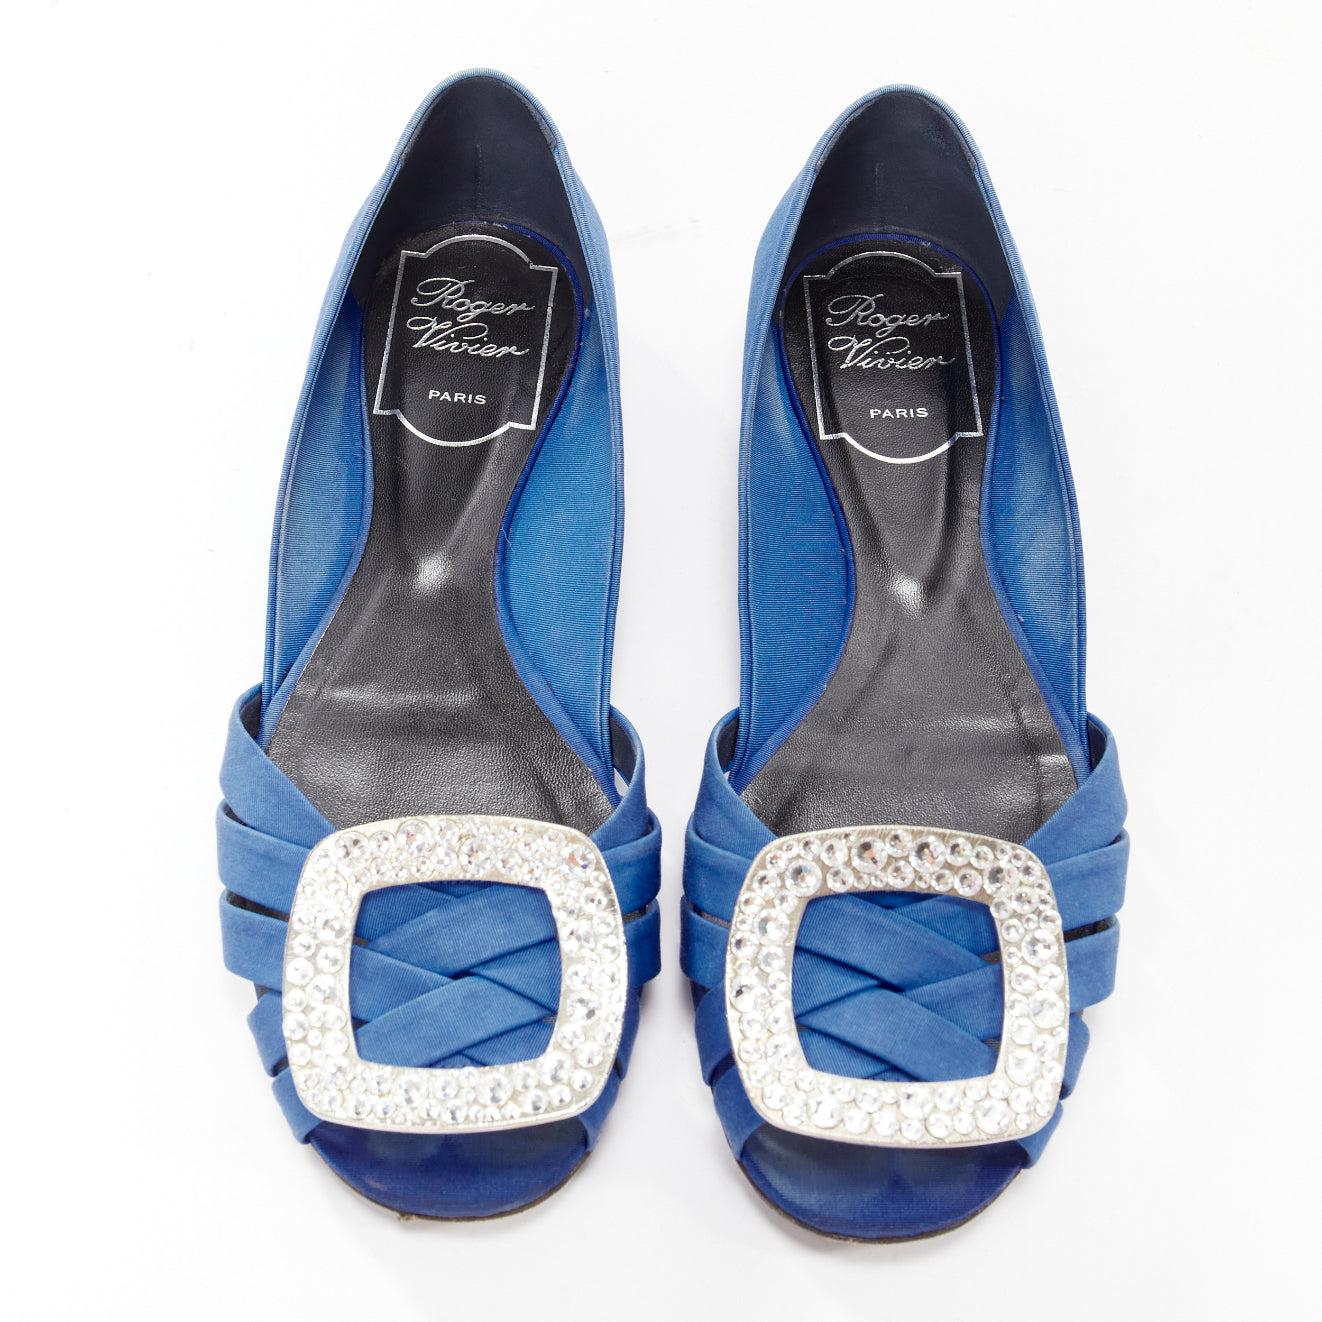 ROGER VIVIER blue satin crystal square buckles woven front pep toe flats EU34.5
Reference: YIKK/A00075
Brand: Roger Vivier
Material: Fabric
Color: Blue, Silver
Pattern: Crystals
Closure: Slip On
Lining: Black Leather
Extra Details: Peep toe with